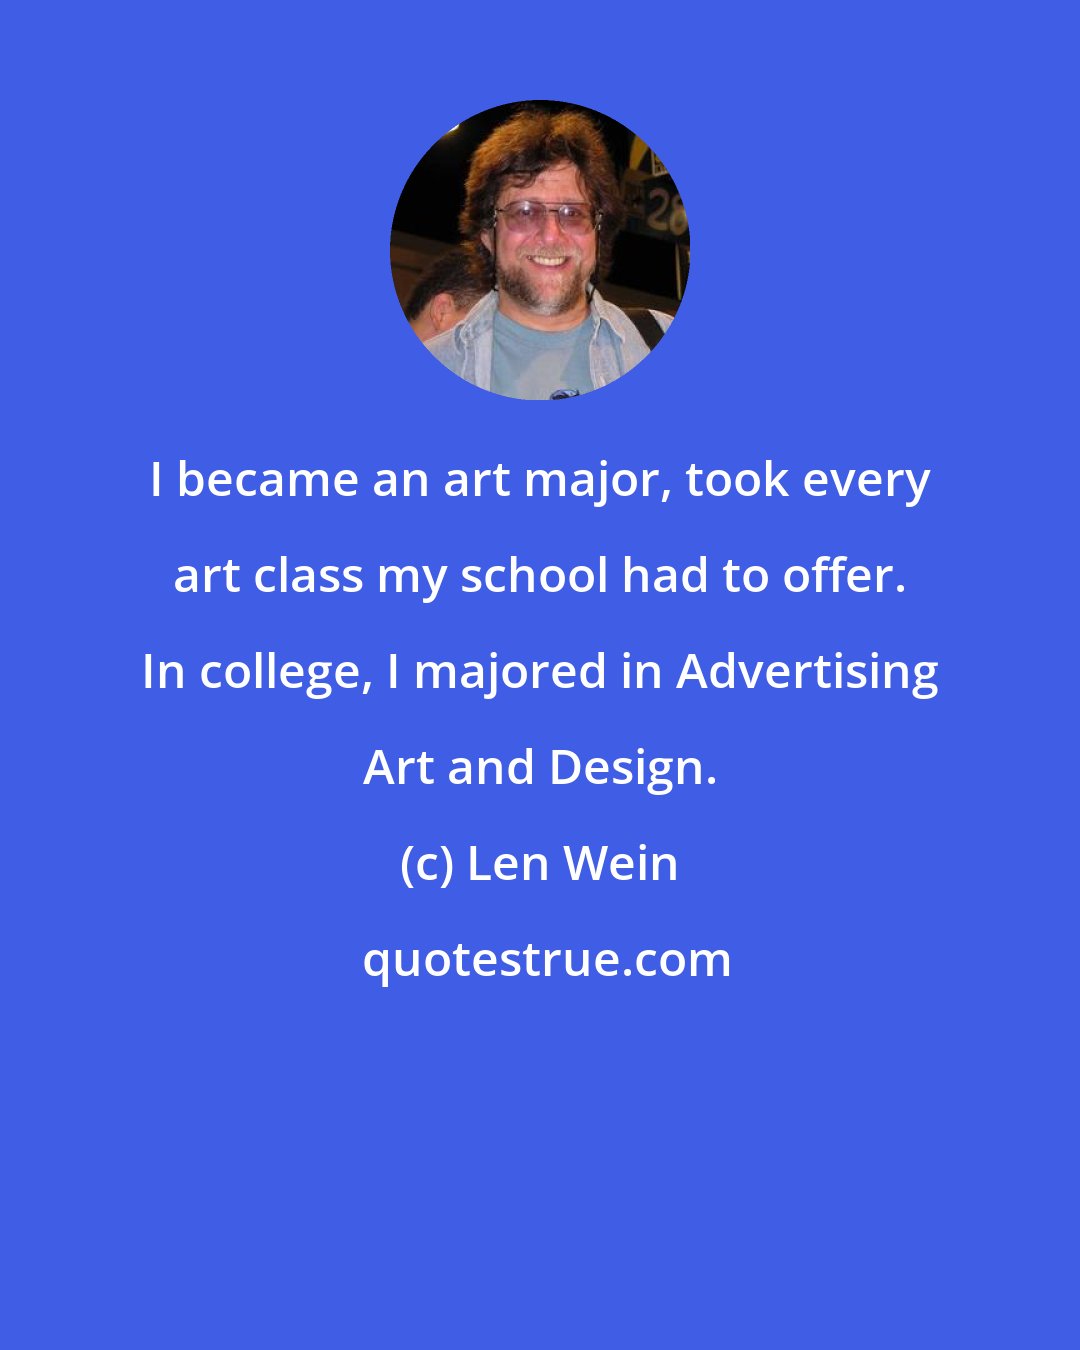 Len Wein: I became an art major, took every art class my school had to offer. In college, I majored in Advertising Art and Design.